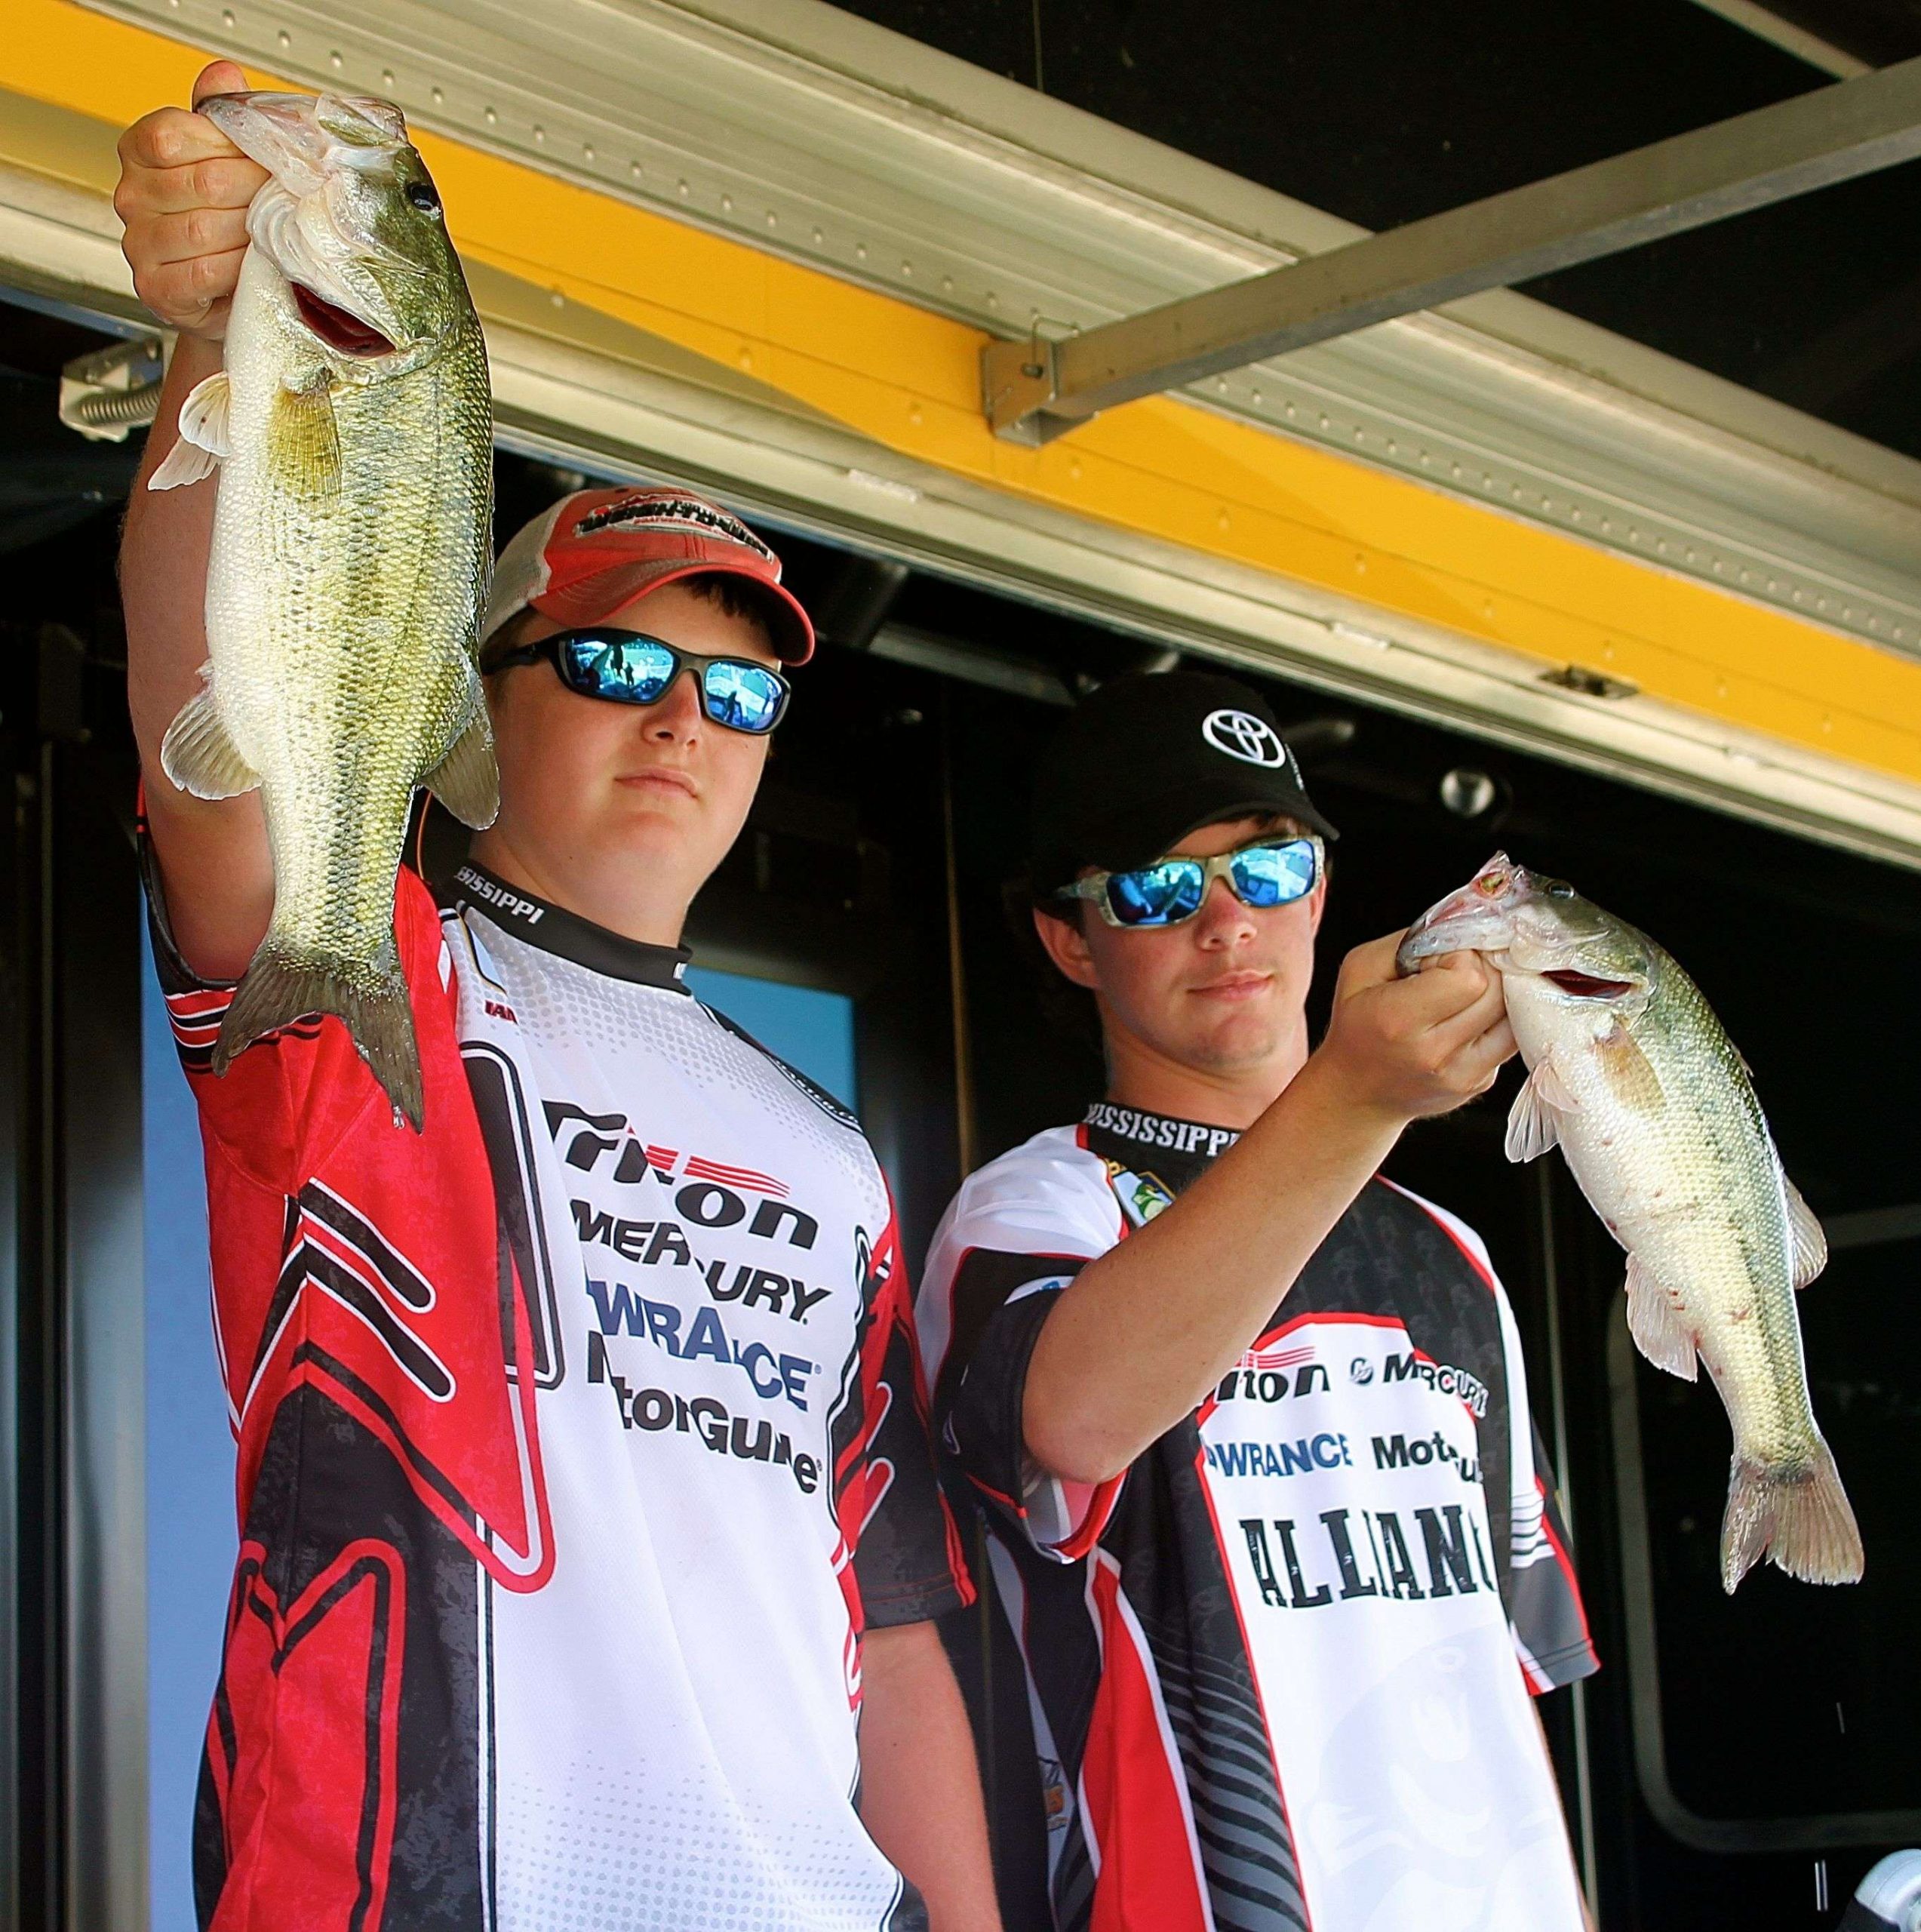 Mississippi high school anglers Ian Goff and Garett Bullock caught two bass that weighed a combined 5-11. They attend East Central High School.